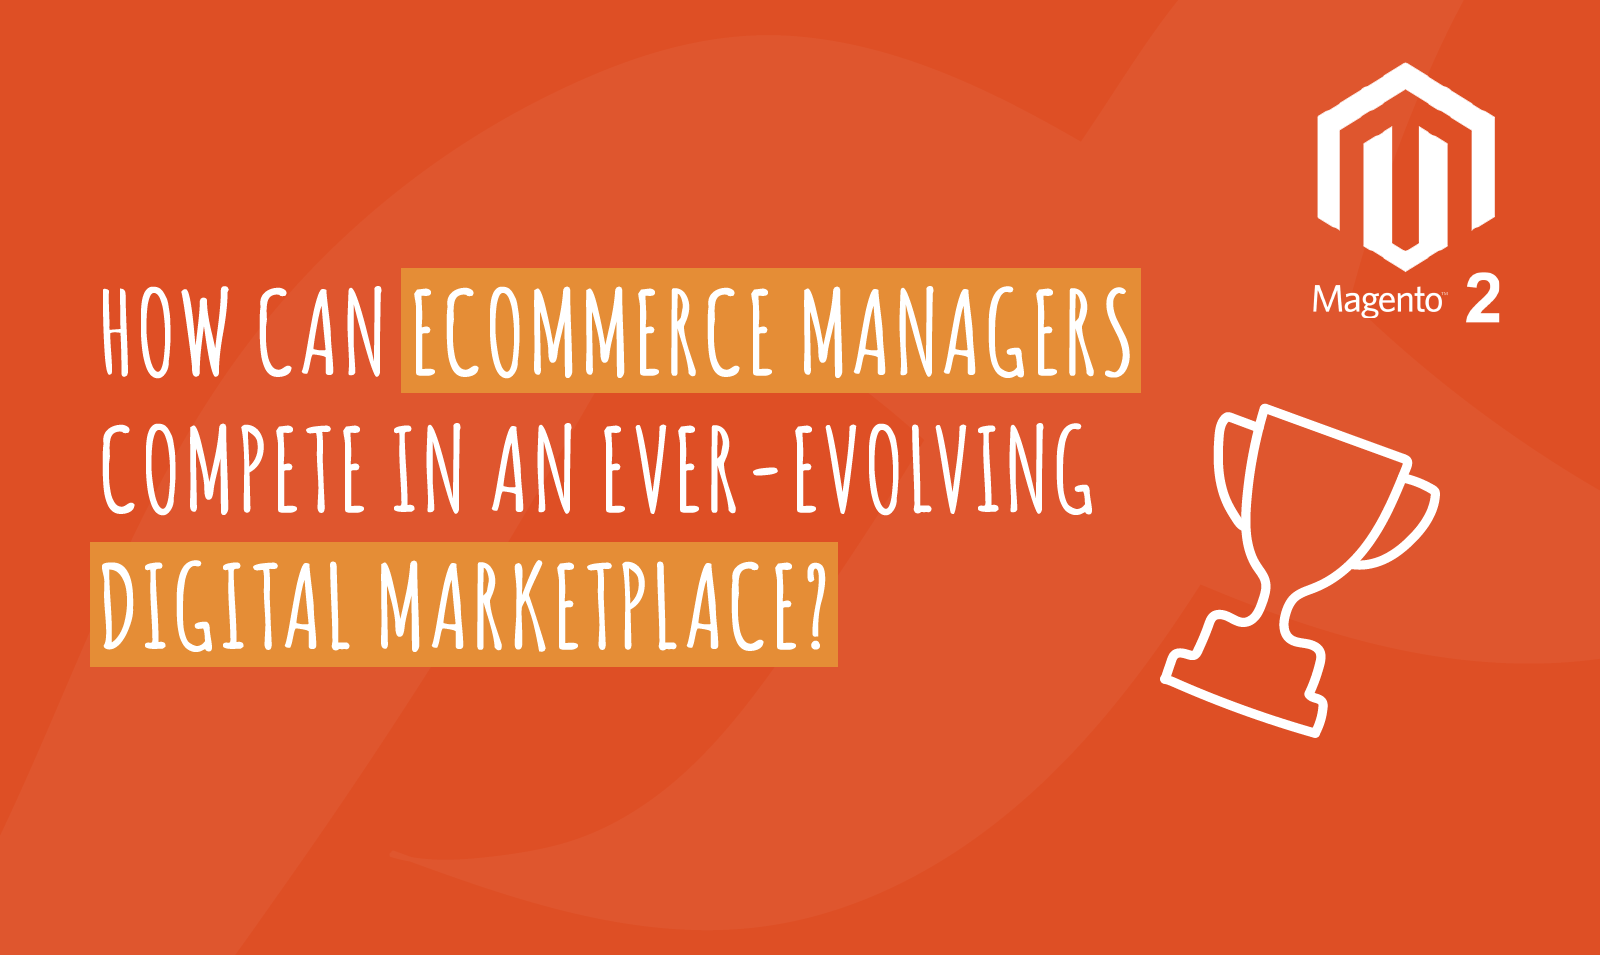 HOW CAN ECOMMERCE MANAGERS COMPETE IN AN EVER-EVOLVING DIGITAL MARKETPLACE